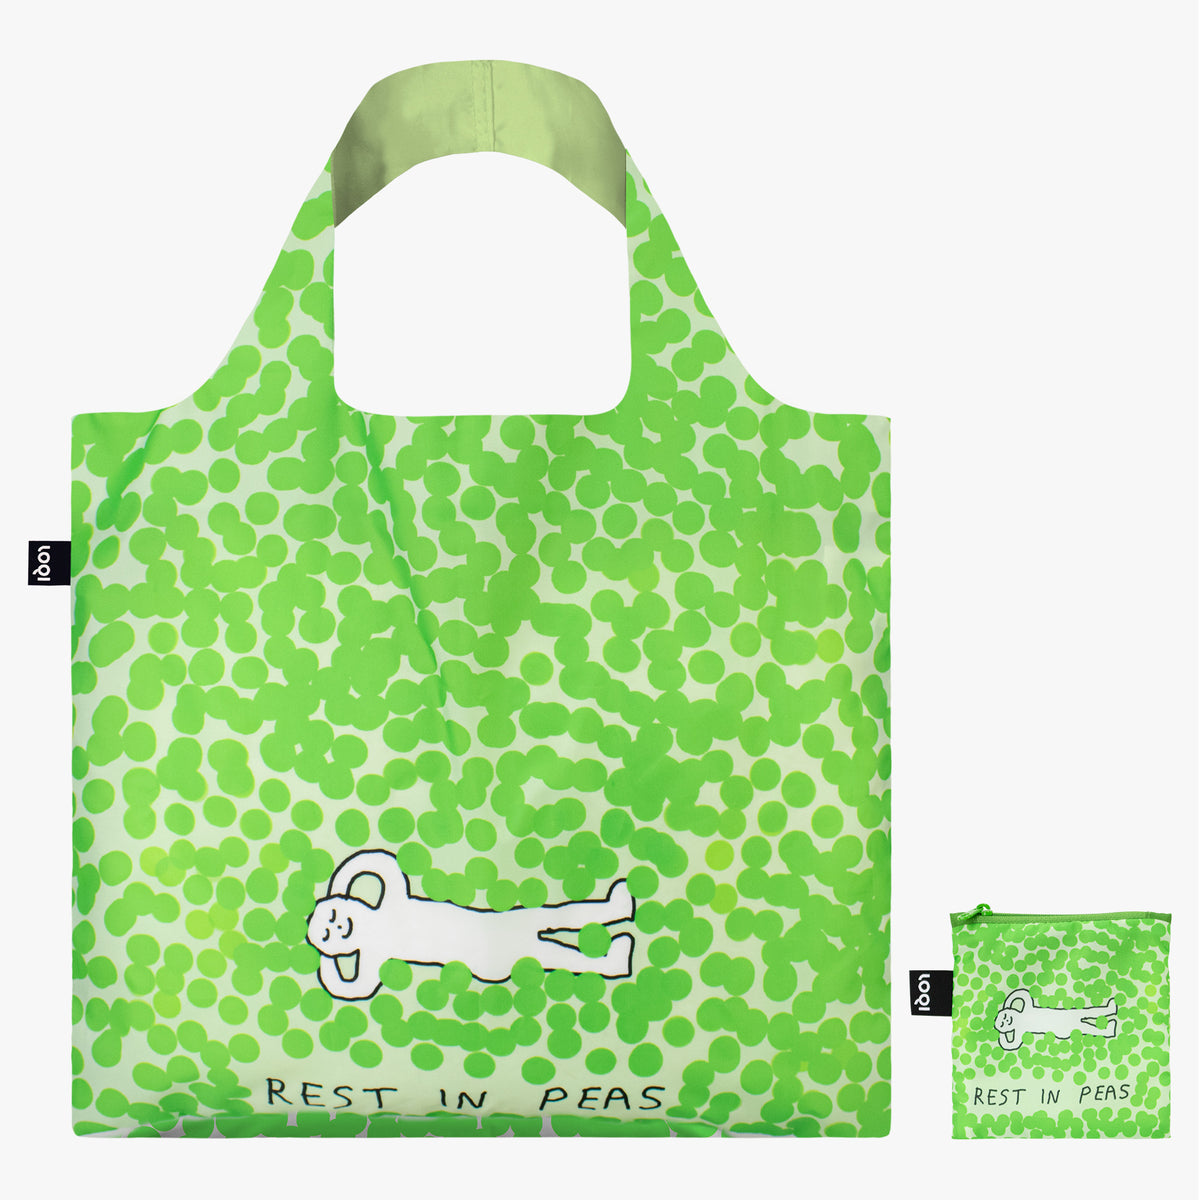 Rest in Peas Recycled Bag